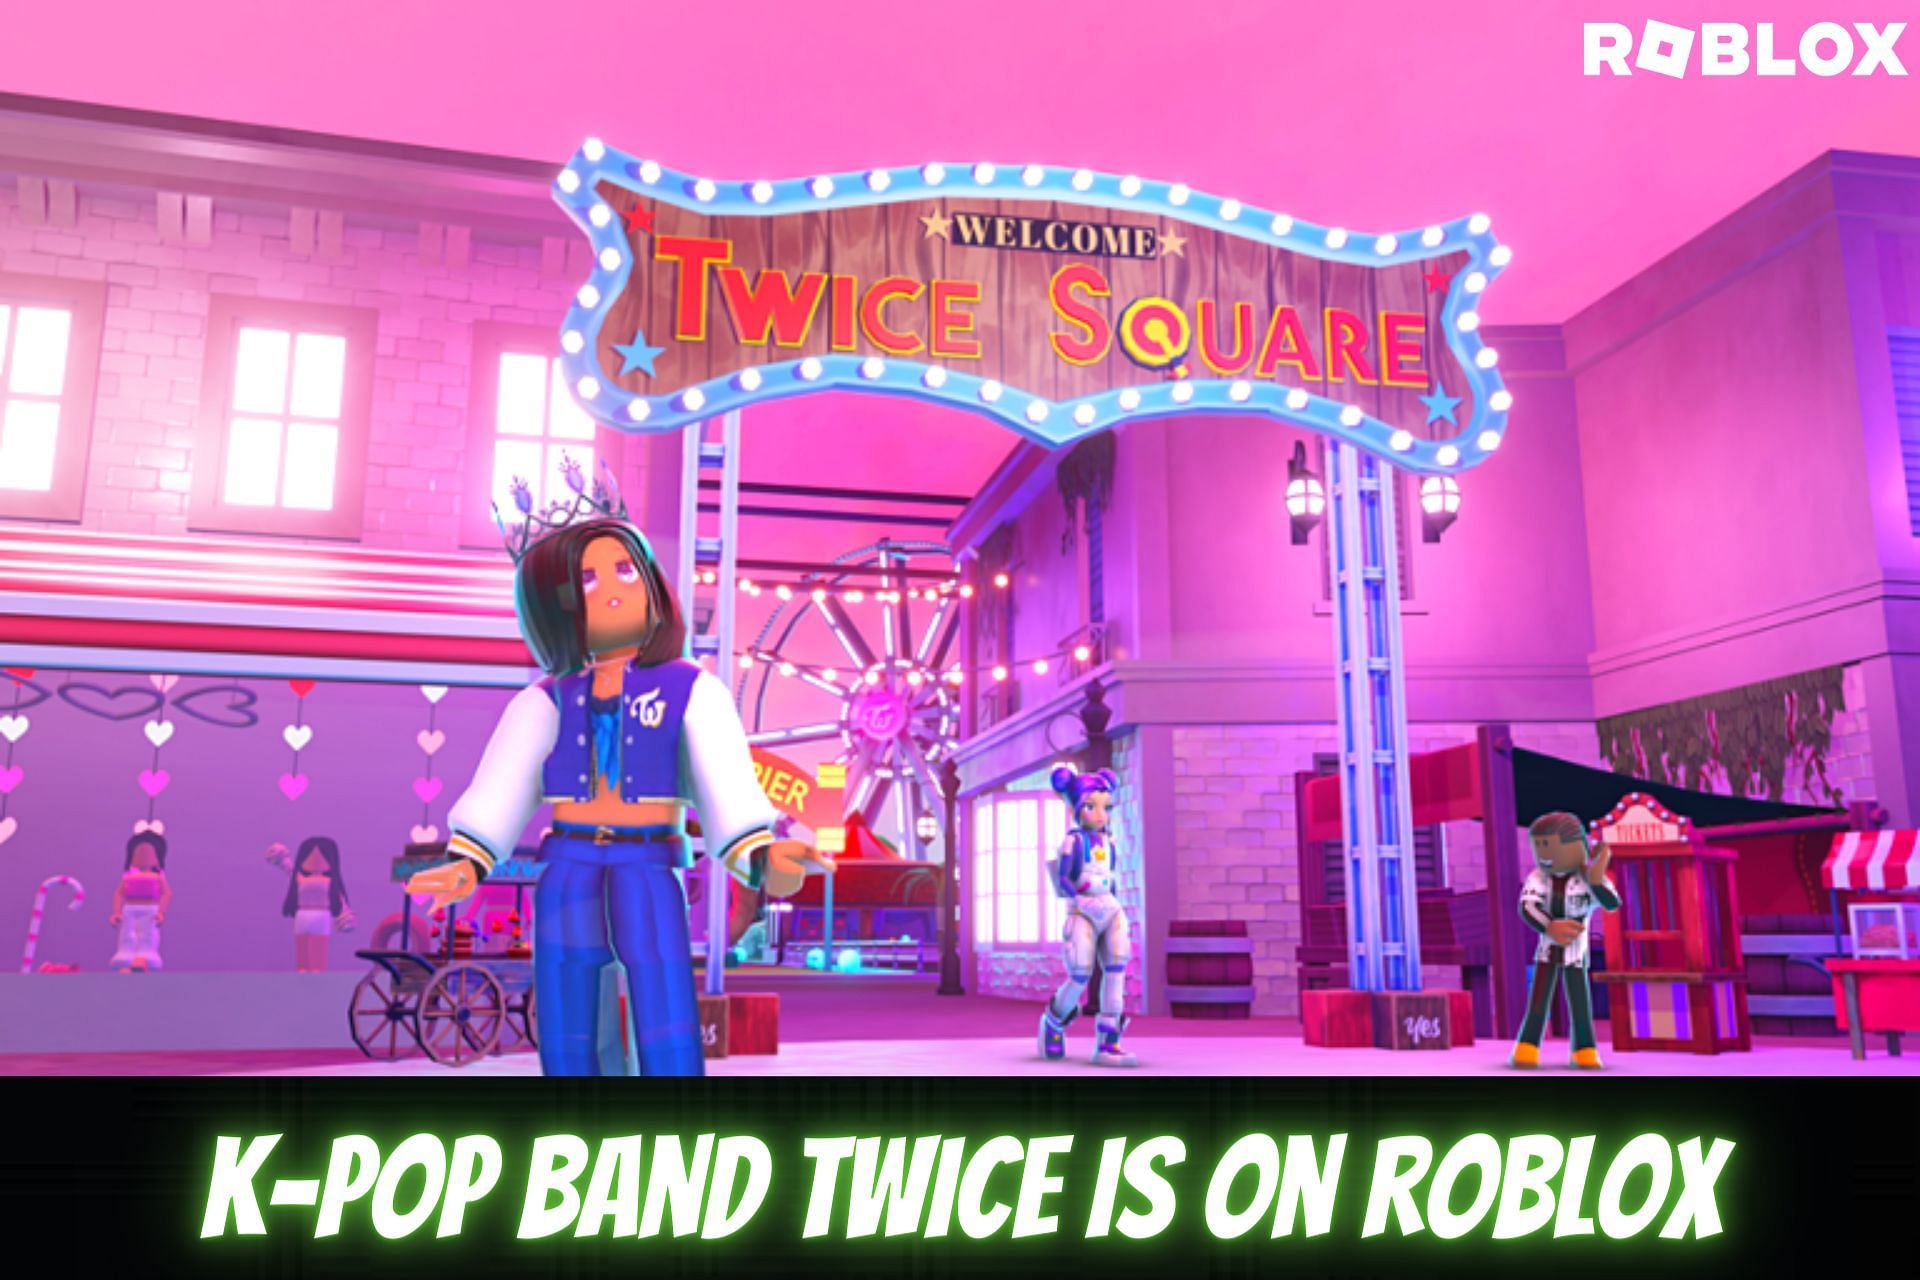 K-pop band Twice is on roblox